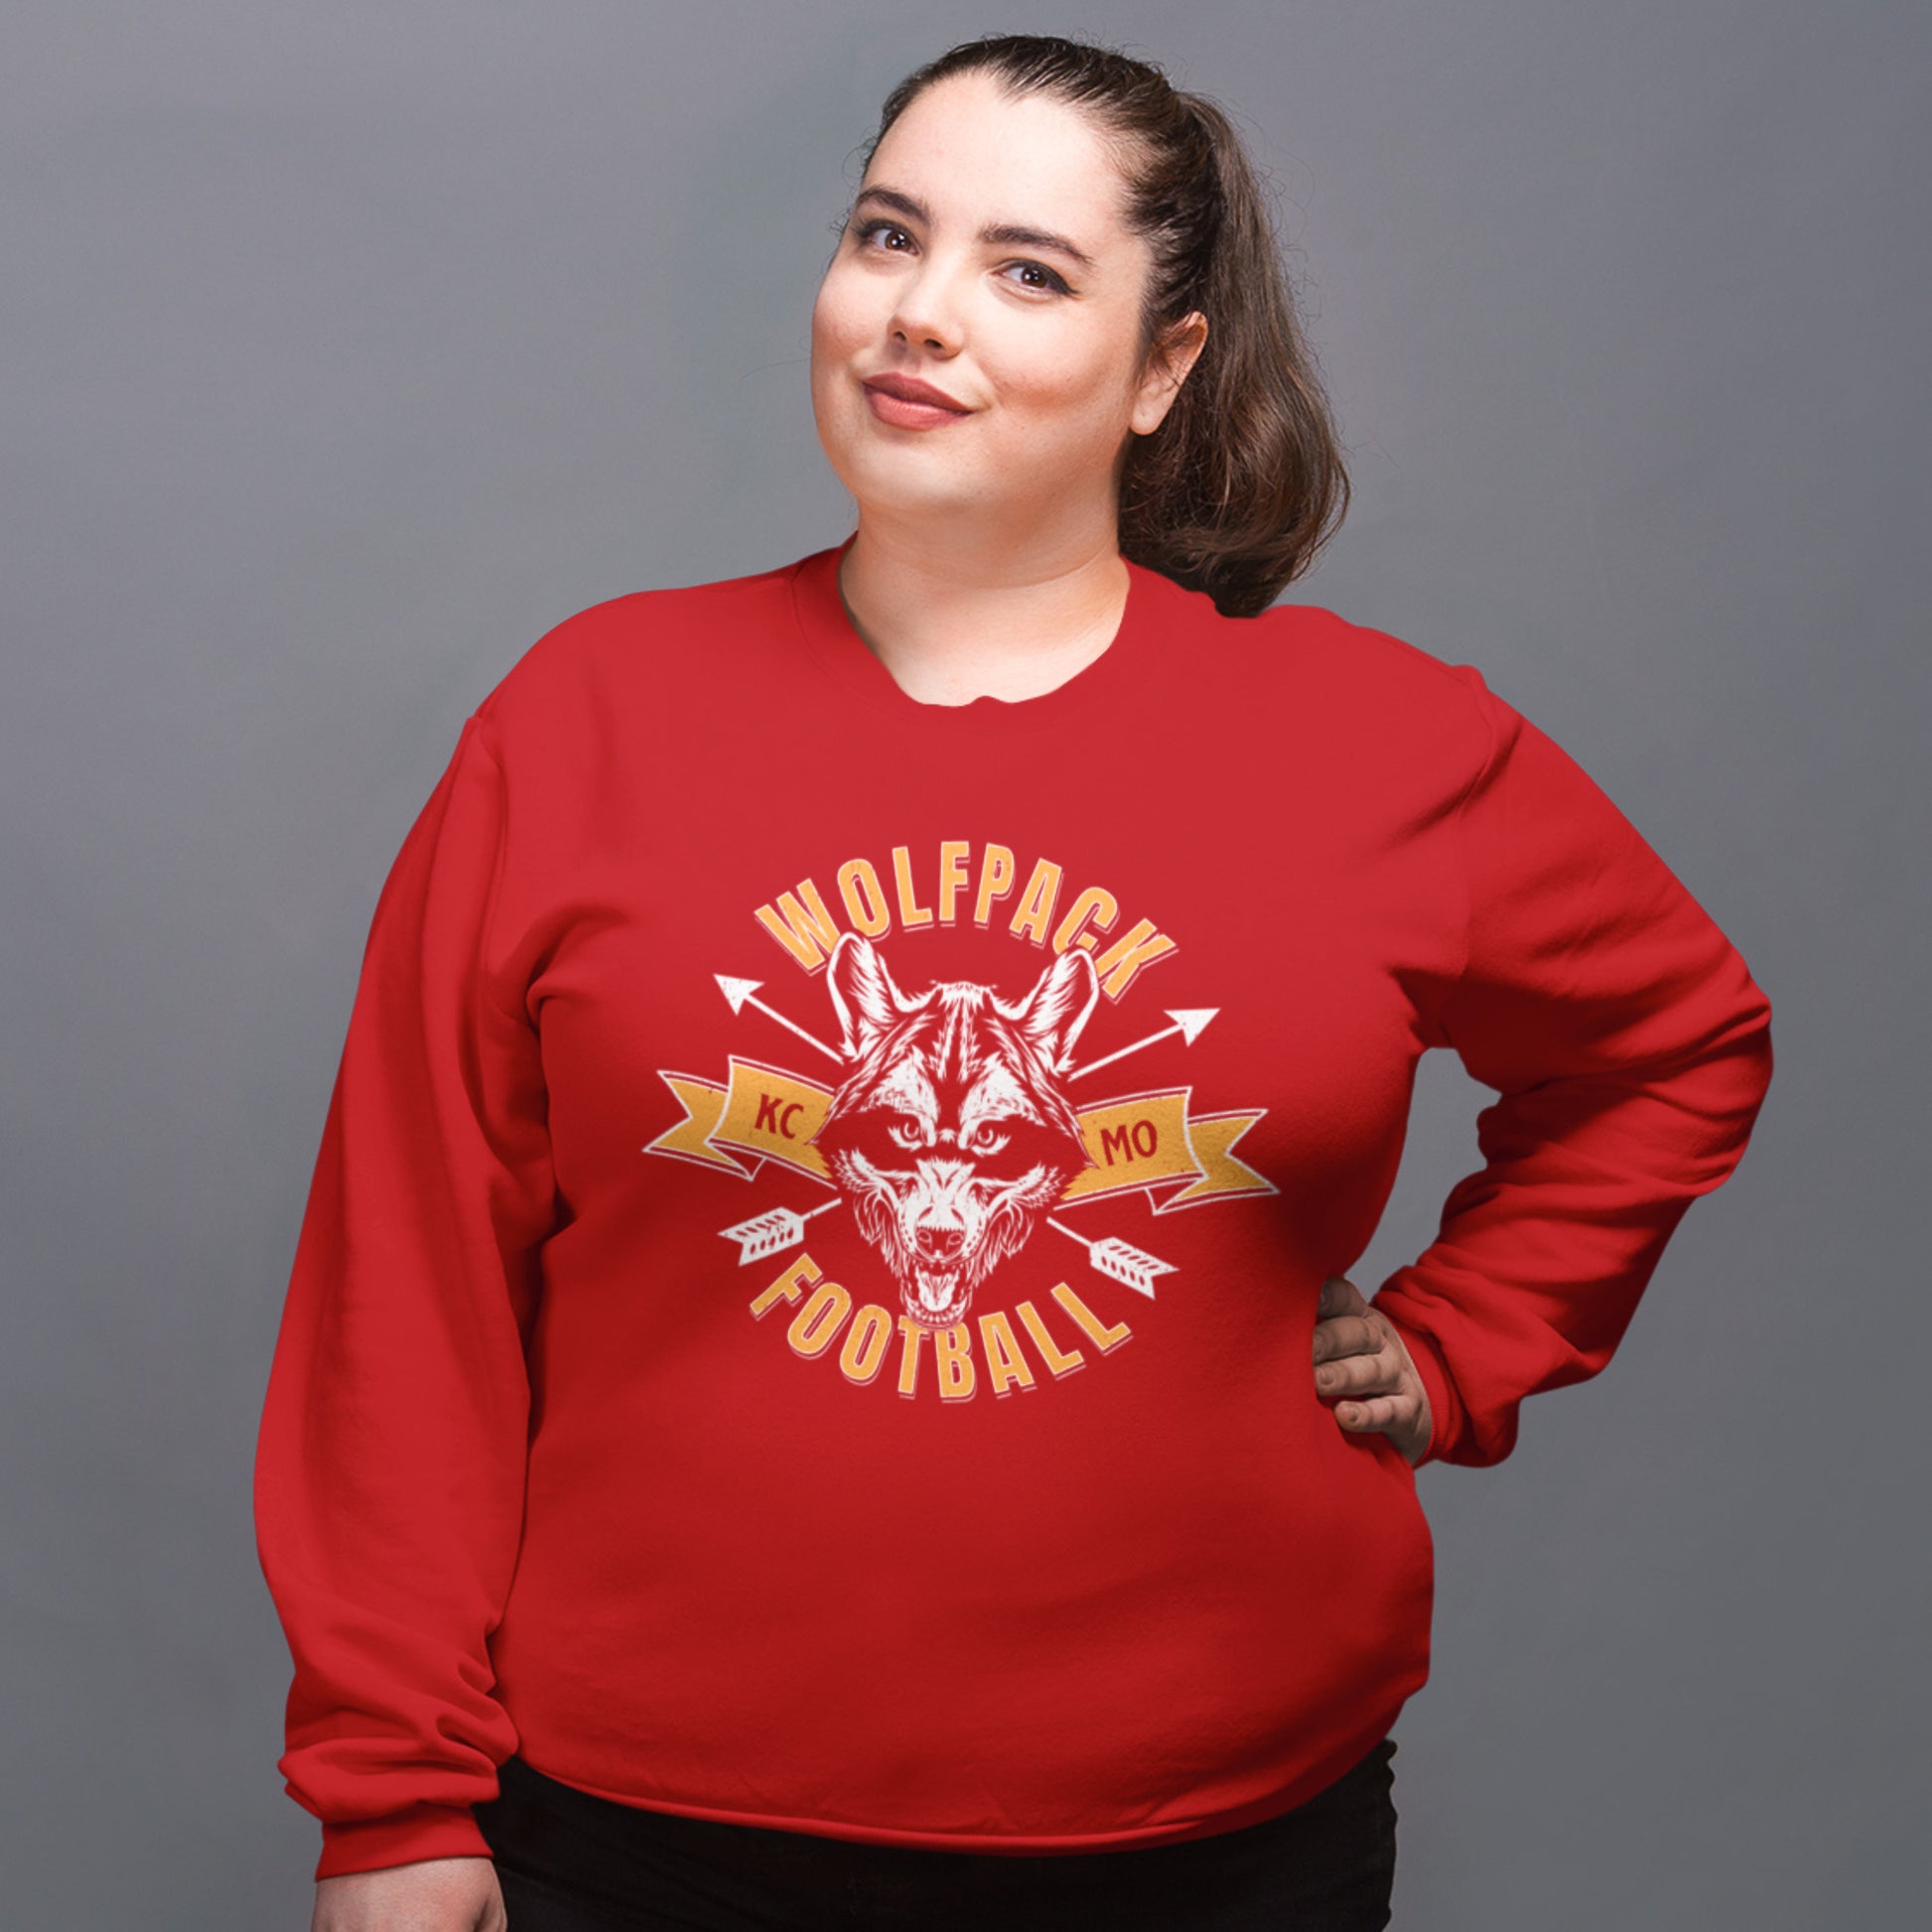 KC Swag Kansas City Chiefs Distressed White & Gold Wolfpack Football on a Red Crewneck Sweatshirt worn by a plus-size female model standing in front of a gray studio wall